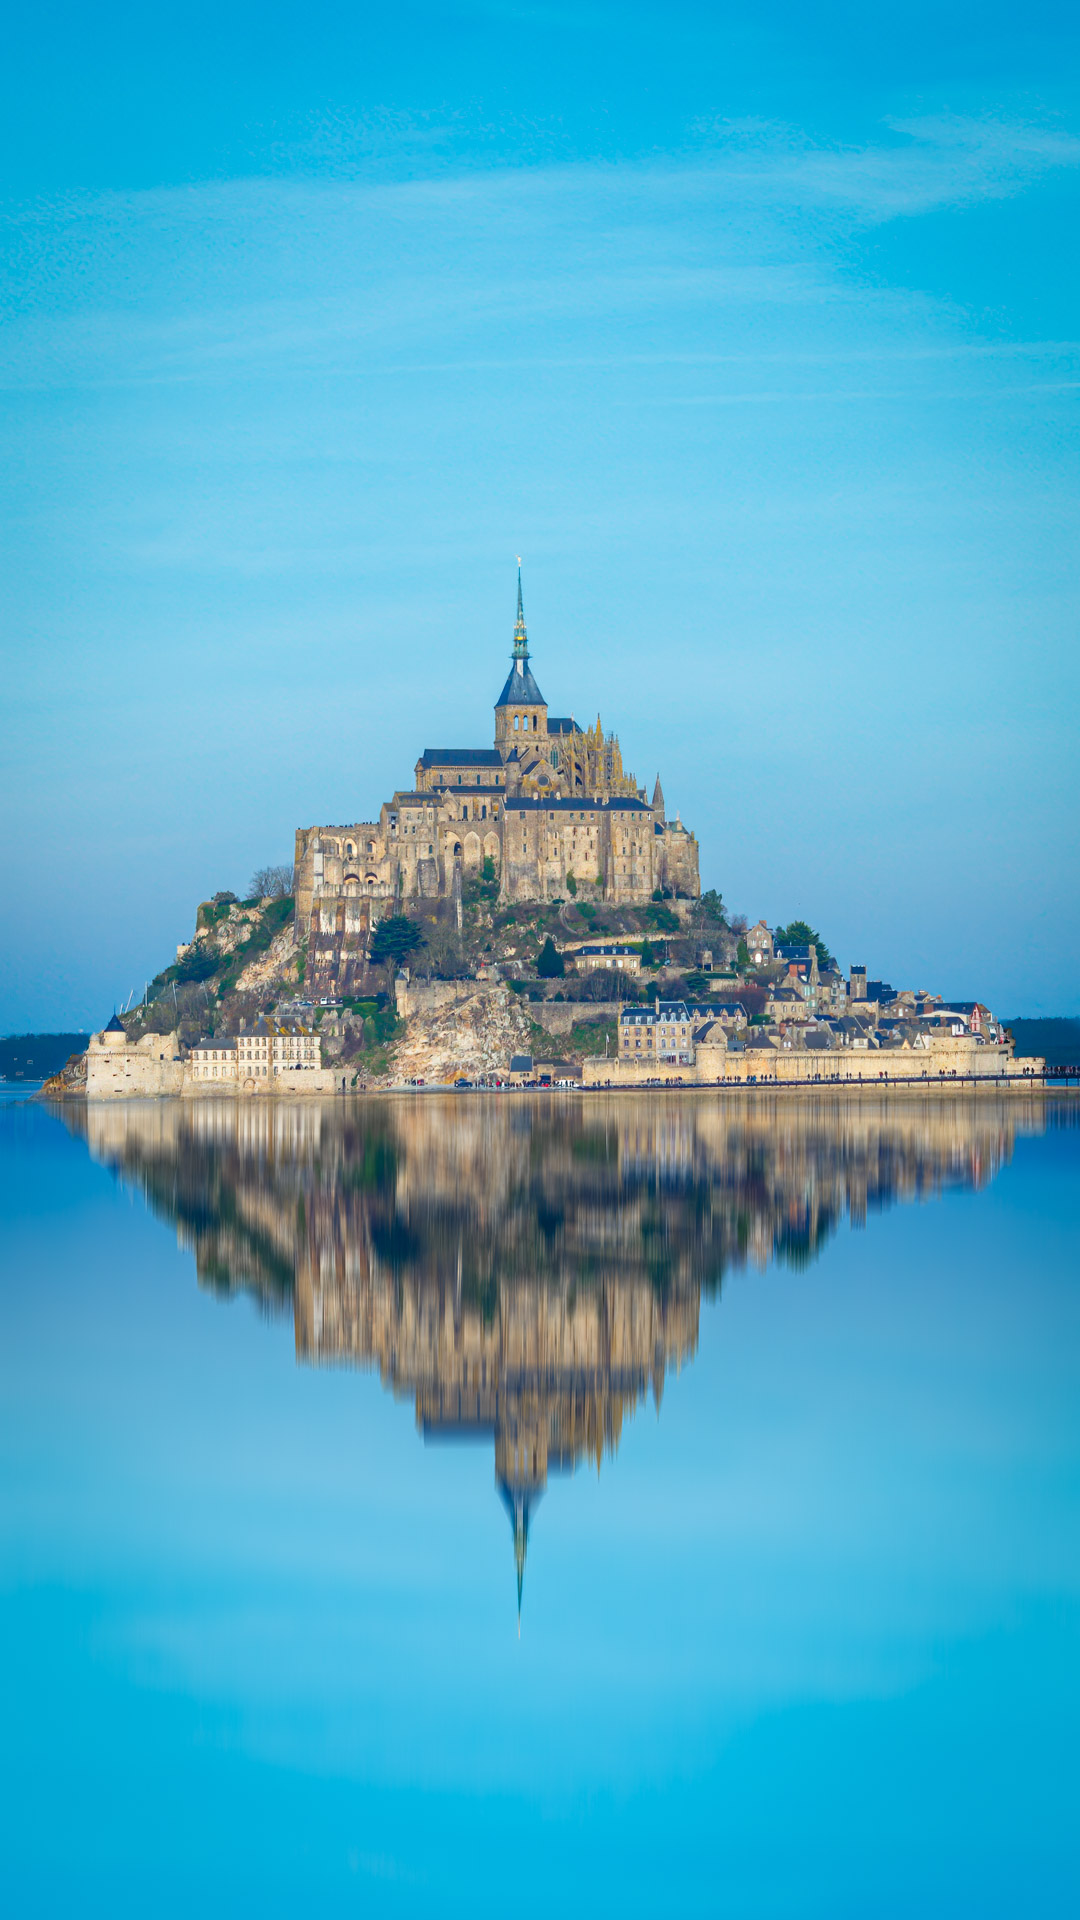 Transport your phone screen to the enchanting landscapes of Mont Saint Michel in France with our captivating city wallpaper.